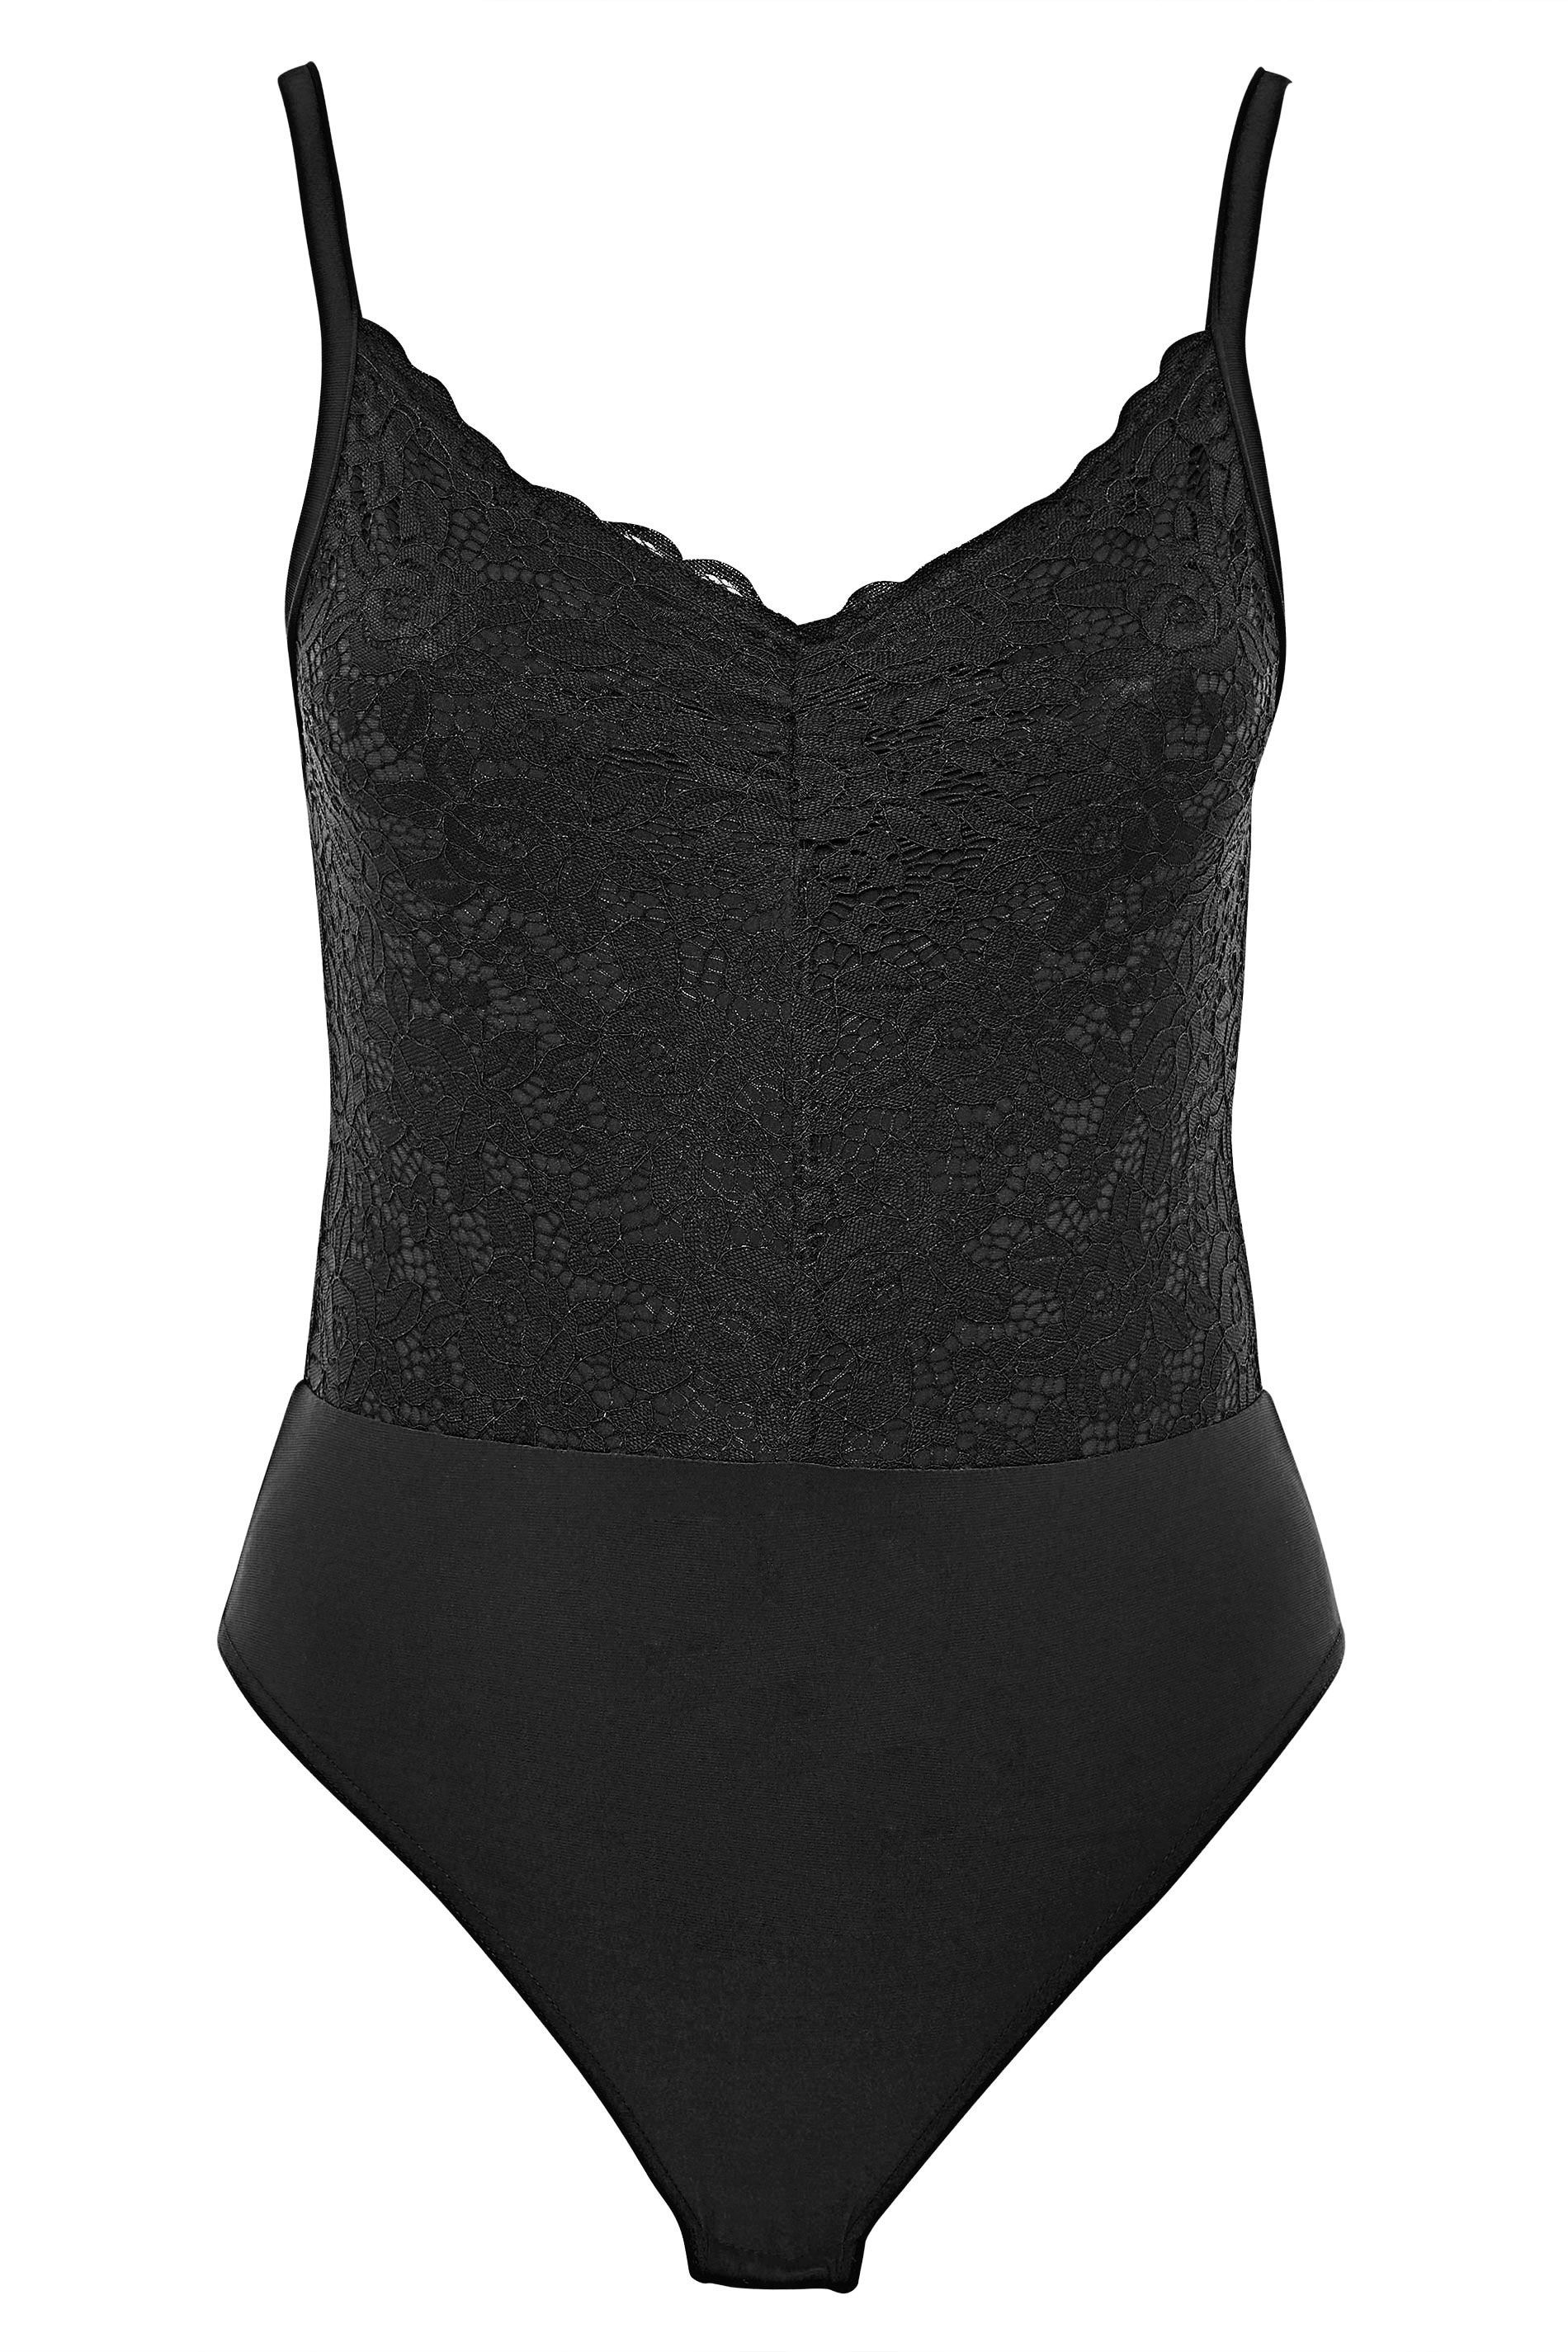 Plus Size LIMITED COLLECTION Black Lace Bodysuit | Yours Clothing